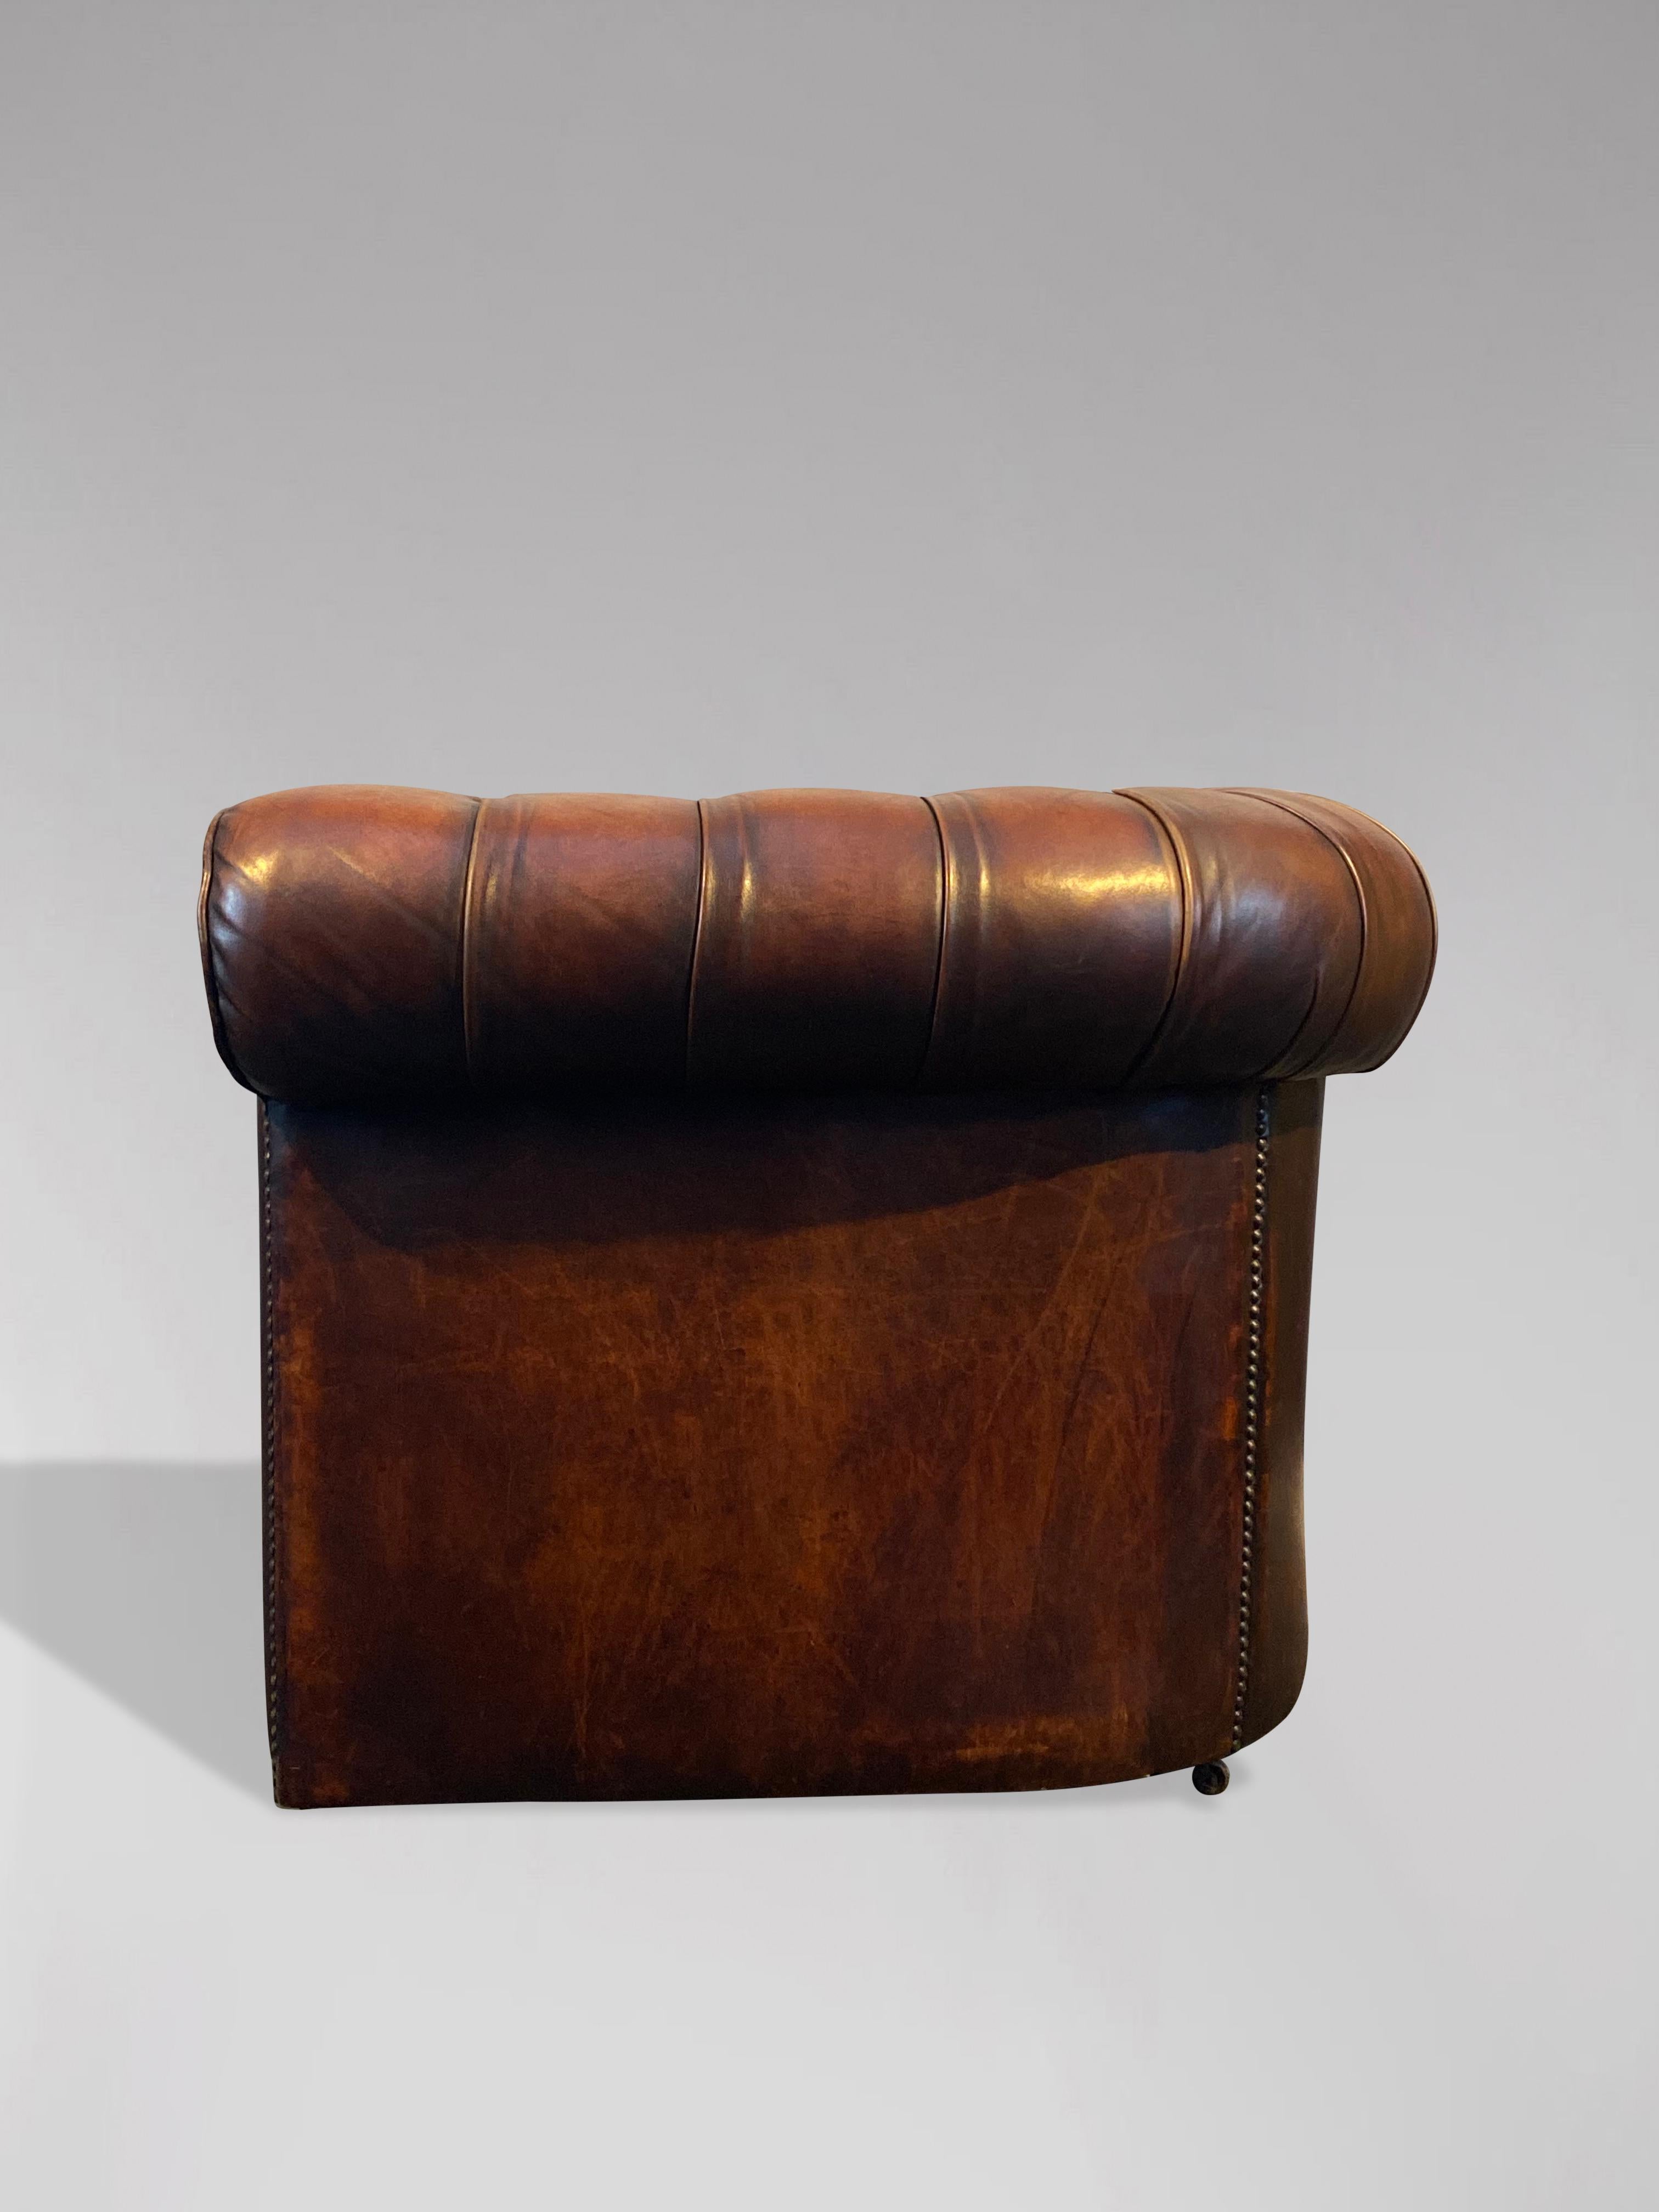 20th Century Brown Leather Chesterfield Club Armchair In Good Condition In Petworth,West Sussex, GB